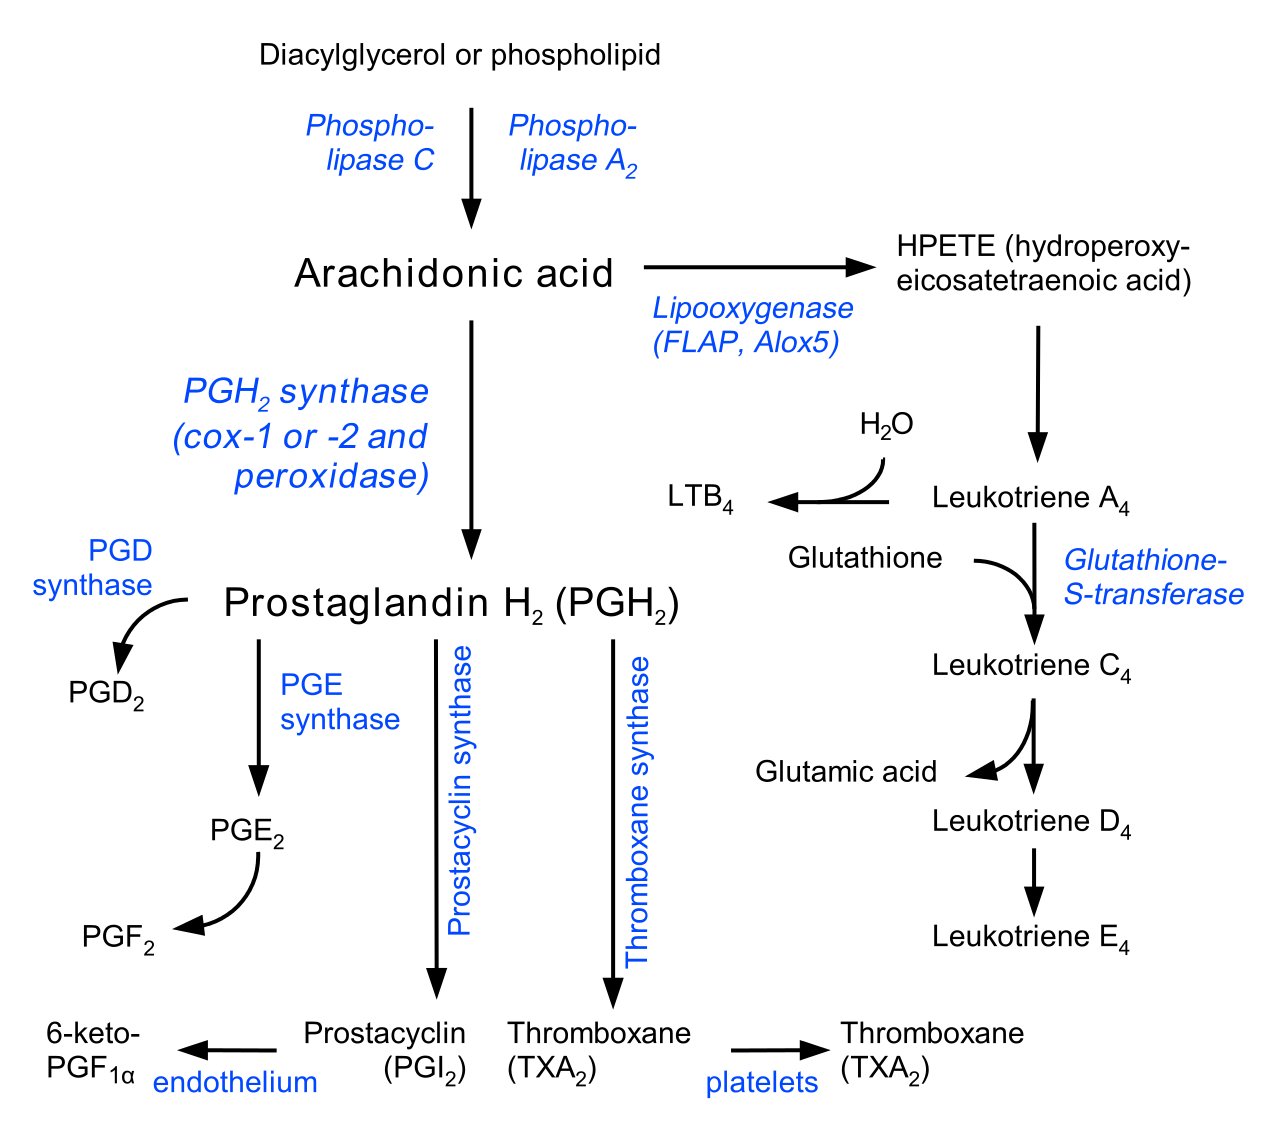 Synthesis of LTE4. (From Wikipedia, created by Jfdwolff, edited by Fvasconcellos and Krishnavedala, CC BY-SA 3.0, https://en.m.wikipedia.org/wiki/File:Eicosanoid_synthesis.svg)